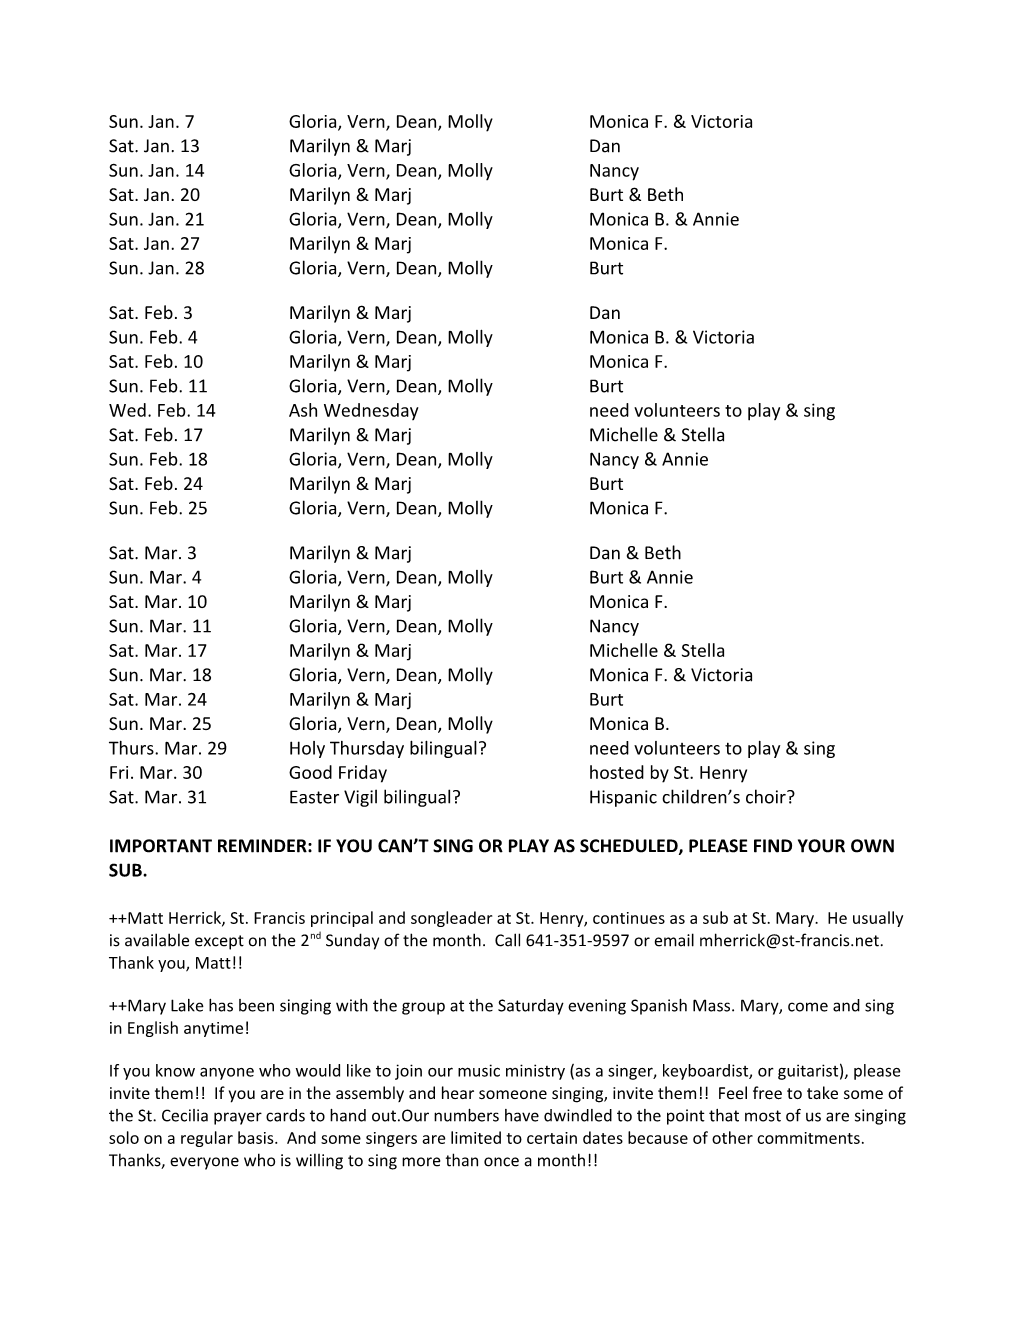 St. Mary Music Ministry Schedule